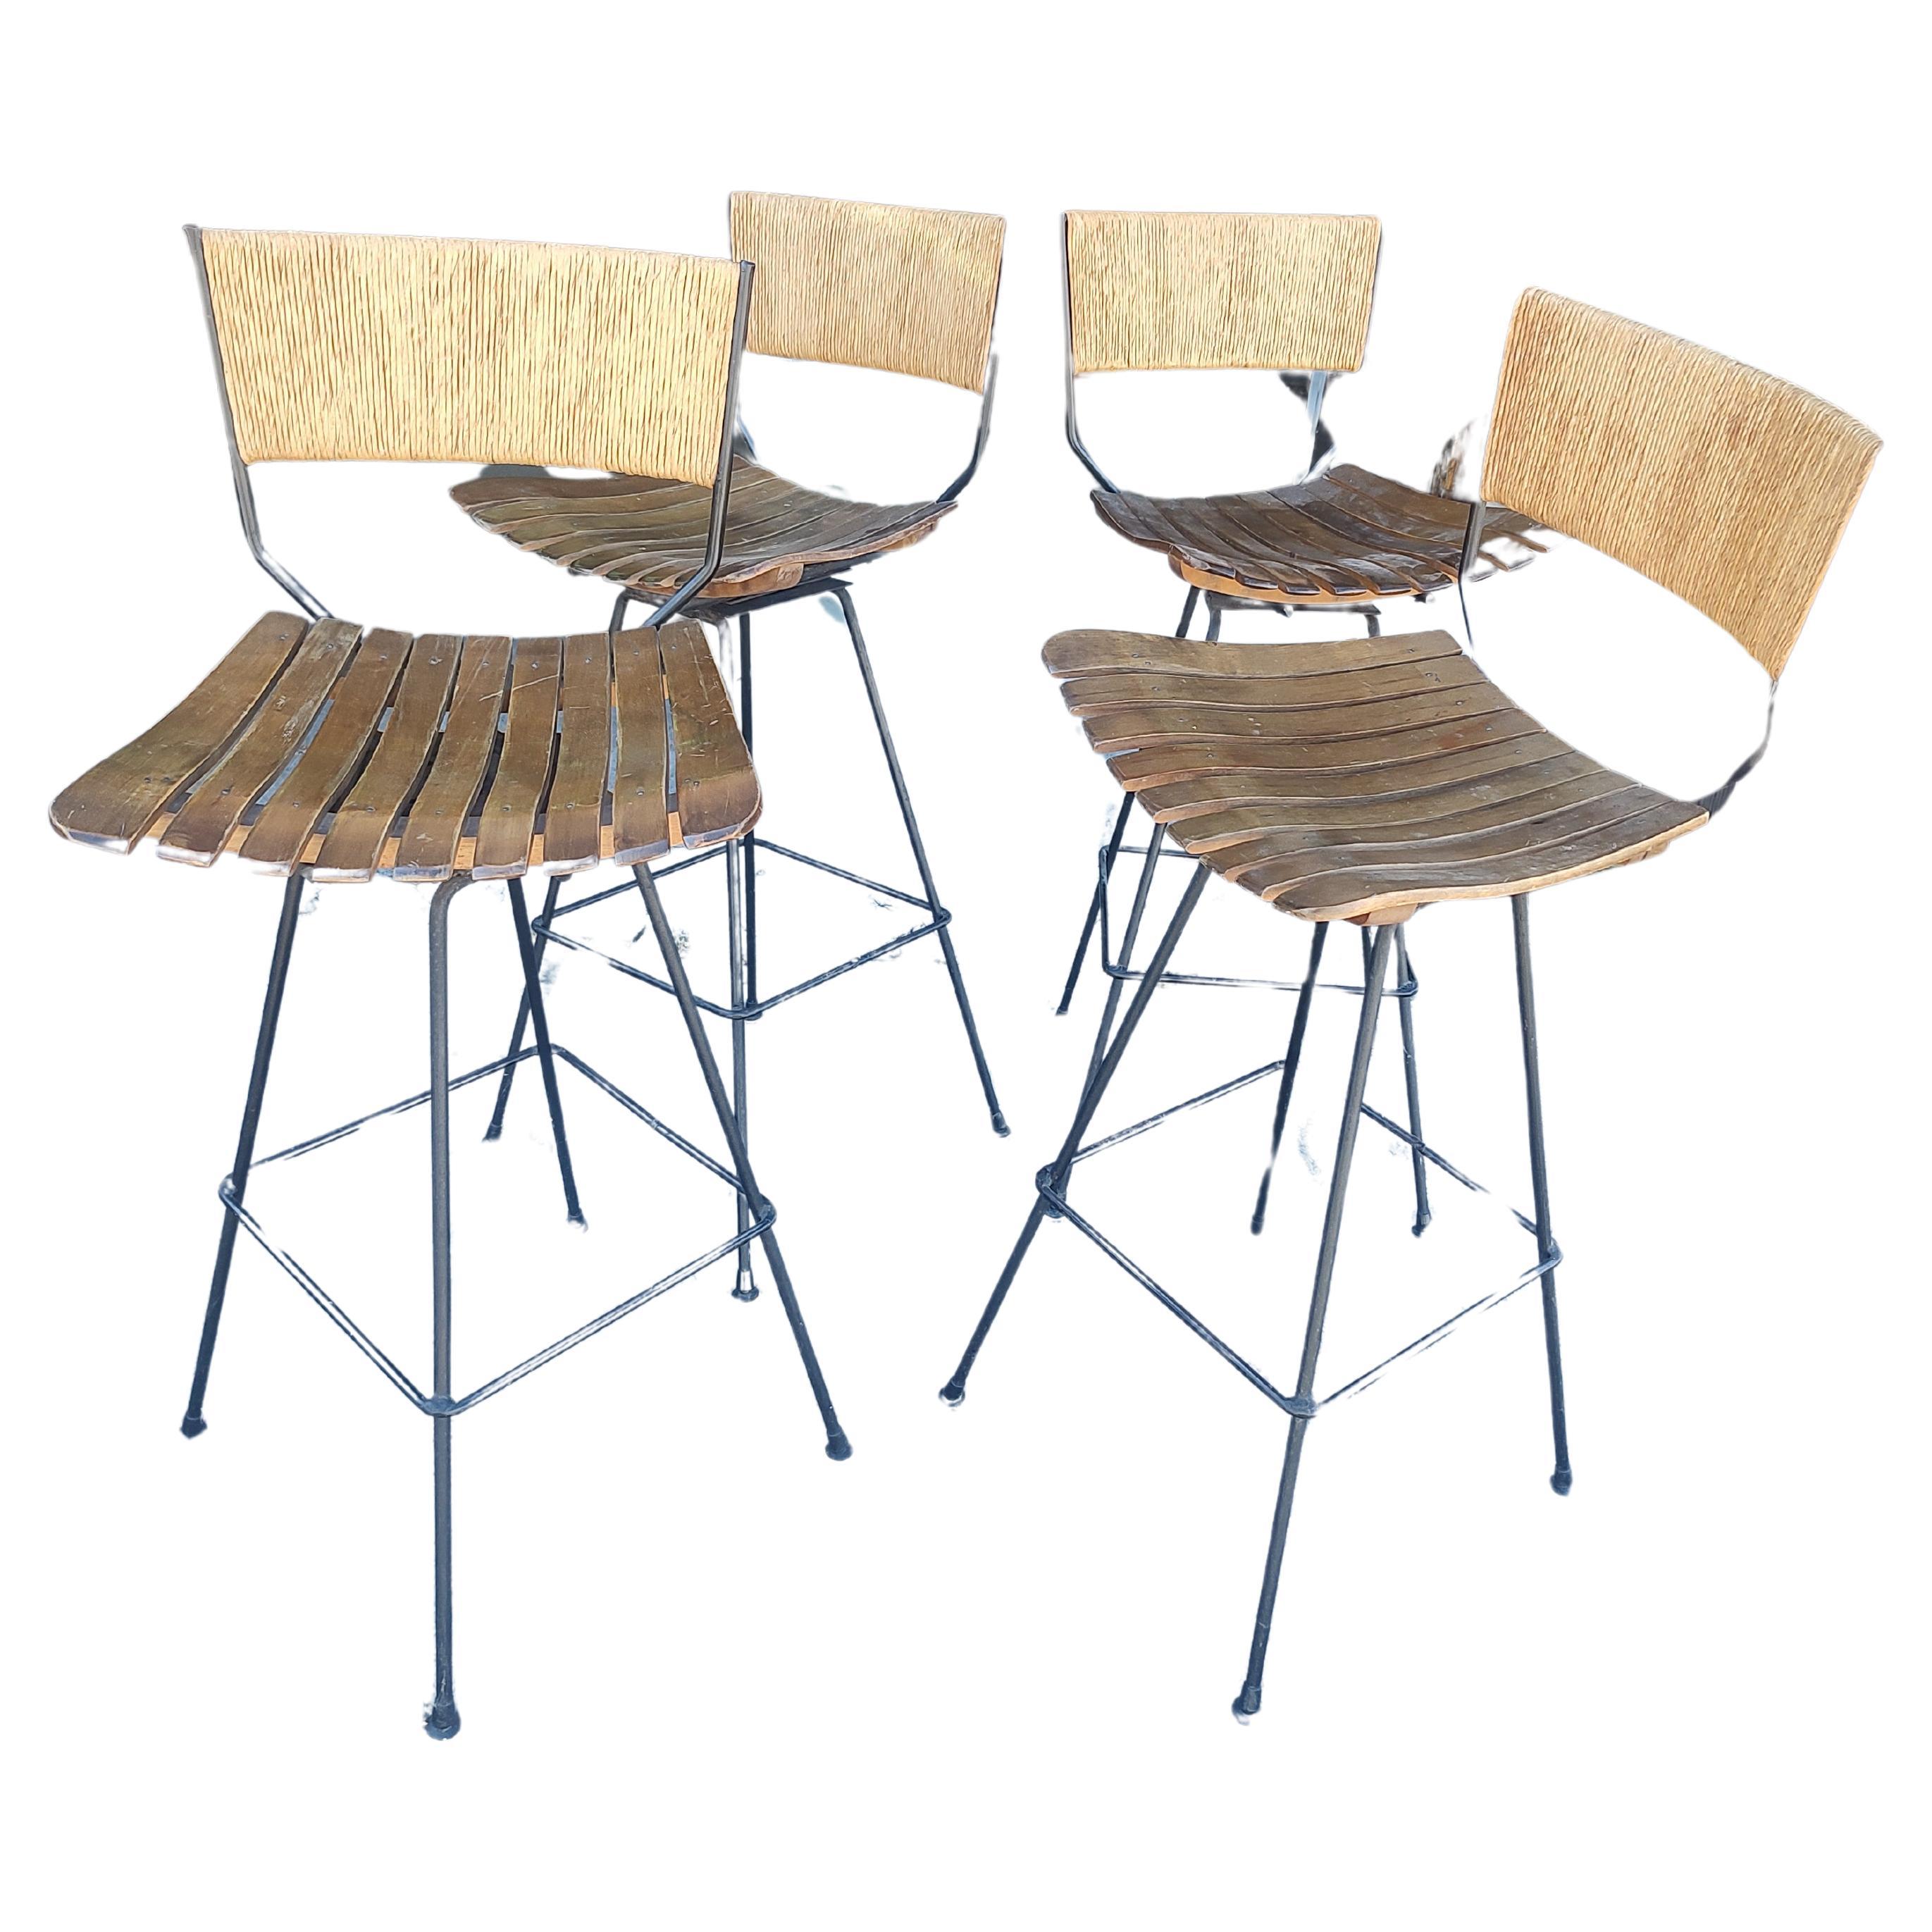 Fabulous set of 4 iron framed bar stools with raffia wrapped backs and maple slatted seats. They swivel also!  In excellent vintage condition with minimal wear, plastic glides on all feet except one which we have replaced with a similar example.